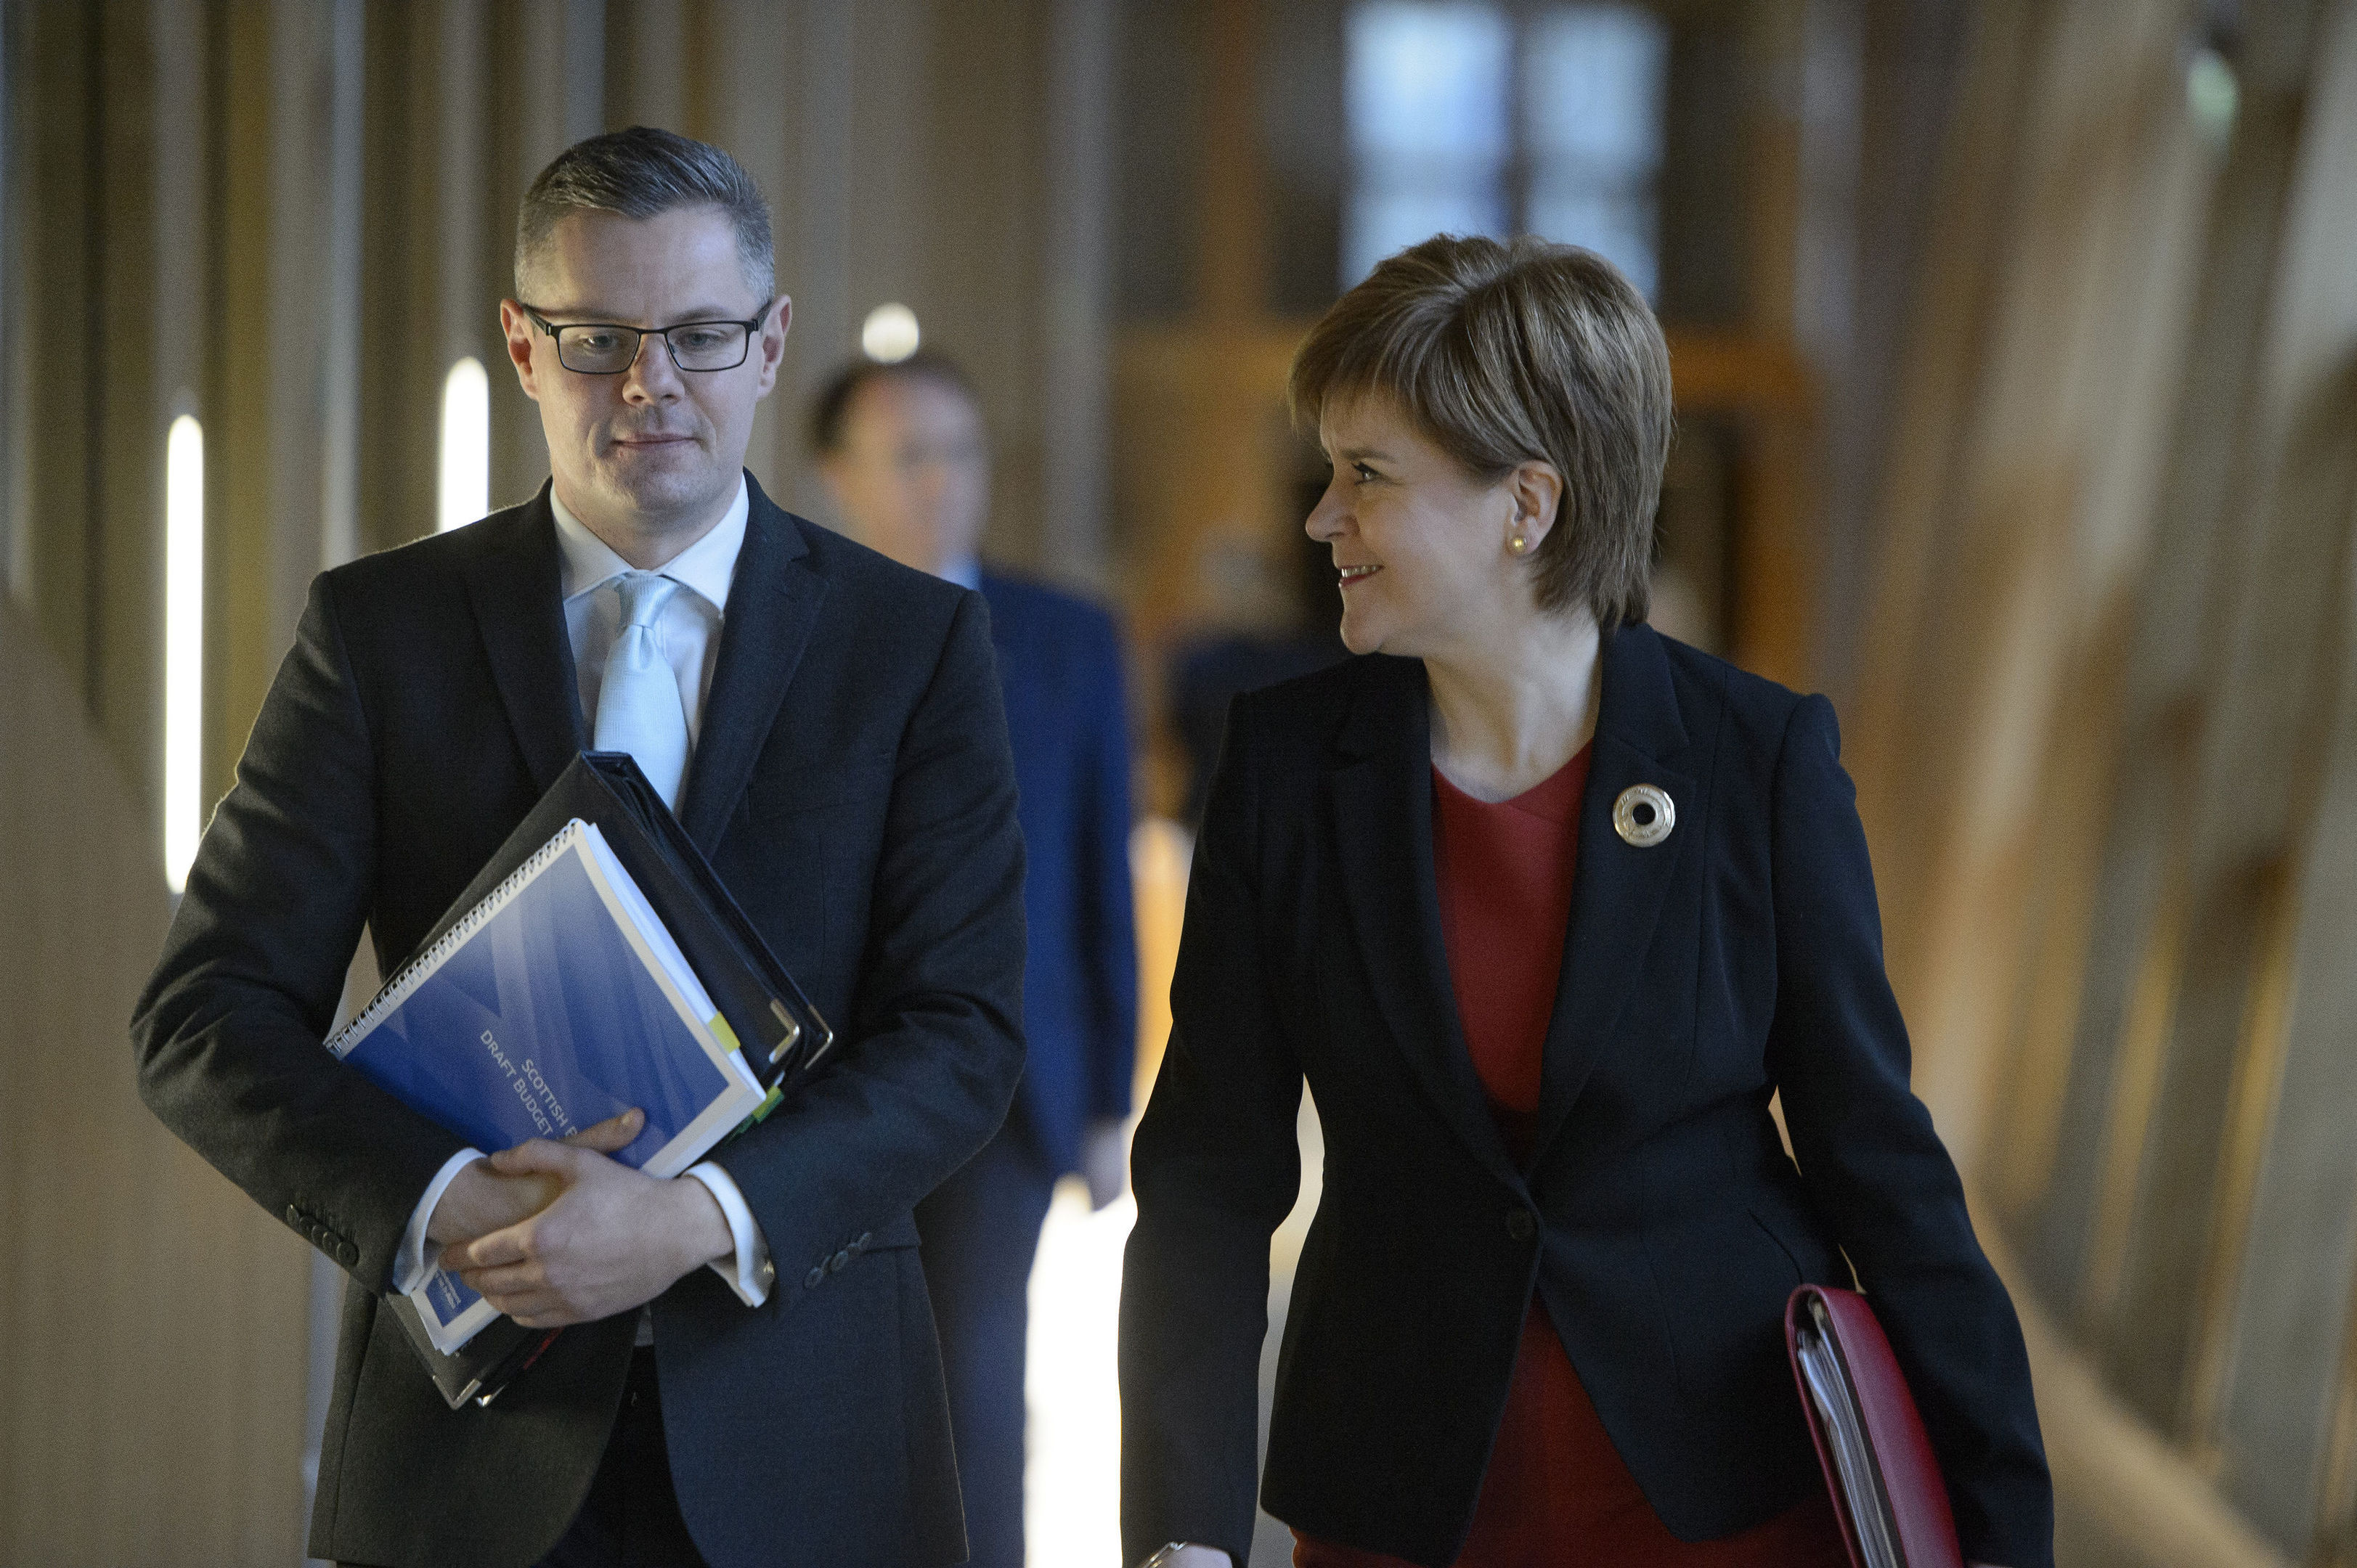 First Minister Nicola Sturgeon and Finance Secretary Derek Mackay arrive to deliver his draft Budget for 2018-19 at the Scottish Parliament.